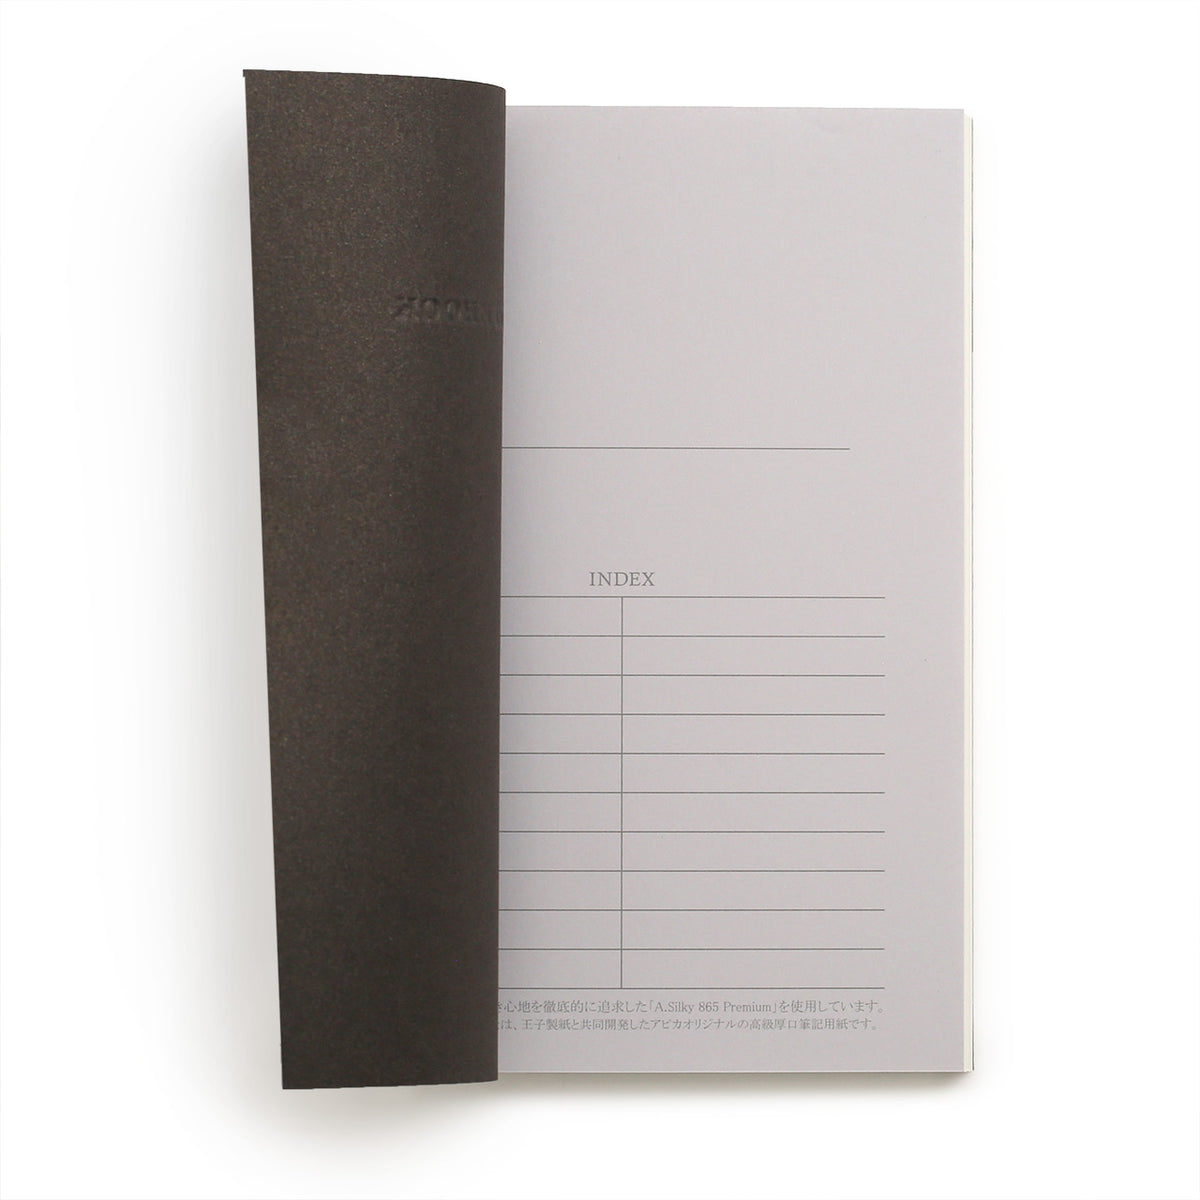 first inside page is smarked with and INDeX grid on the CD Premium notebooks from Apica